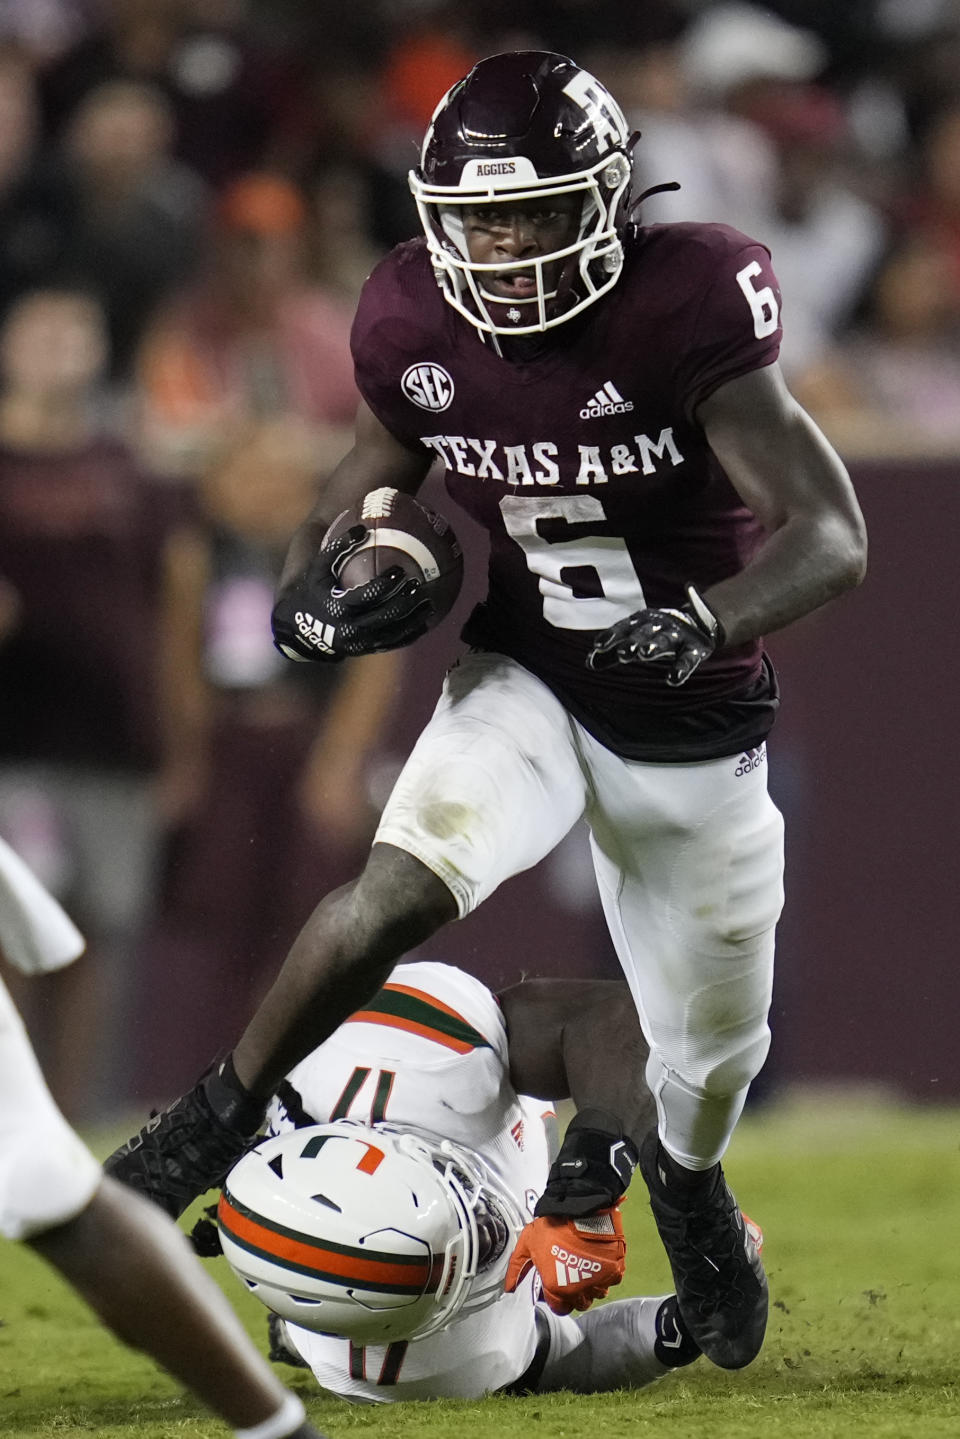 Texas A&M running back Devon Achane (6) sheds a tackle attempt by Miami linebacker Waynmon Steed Jr. (17) to pick up a first down during the second quarter of an NCAA college football game Saturday, Sept. 17, 2022, in College Station, Texas. (AP Photo/Sam Craft)